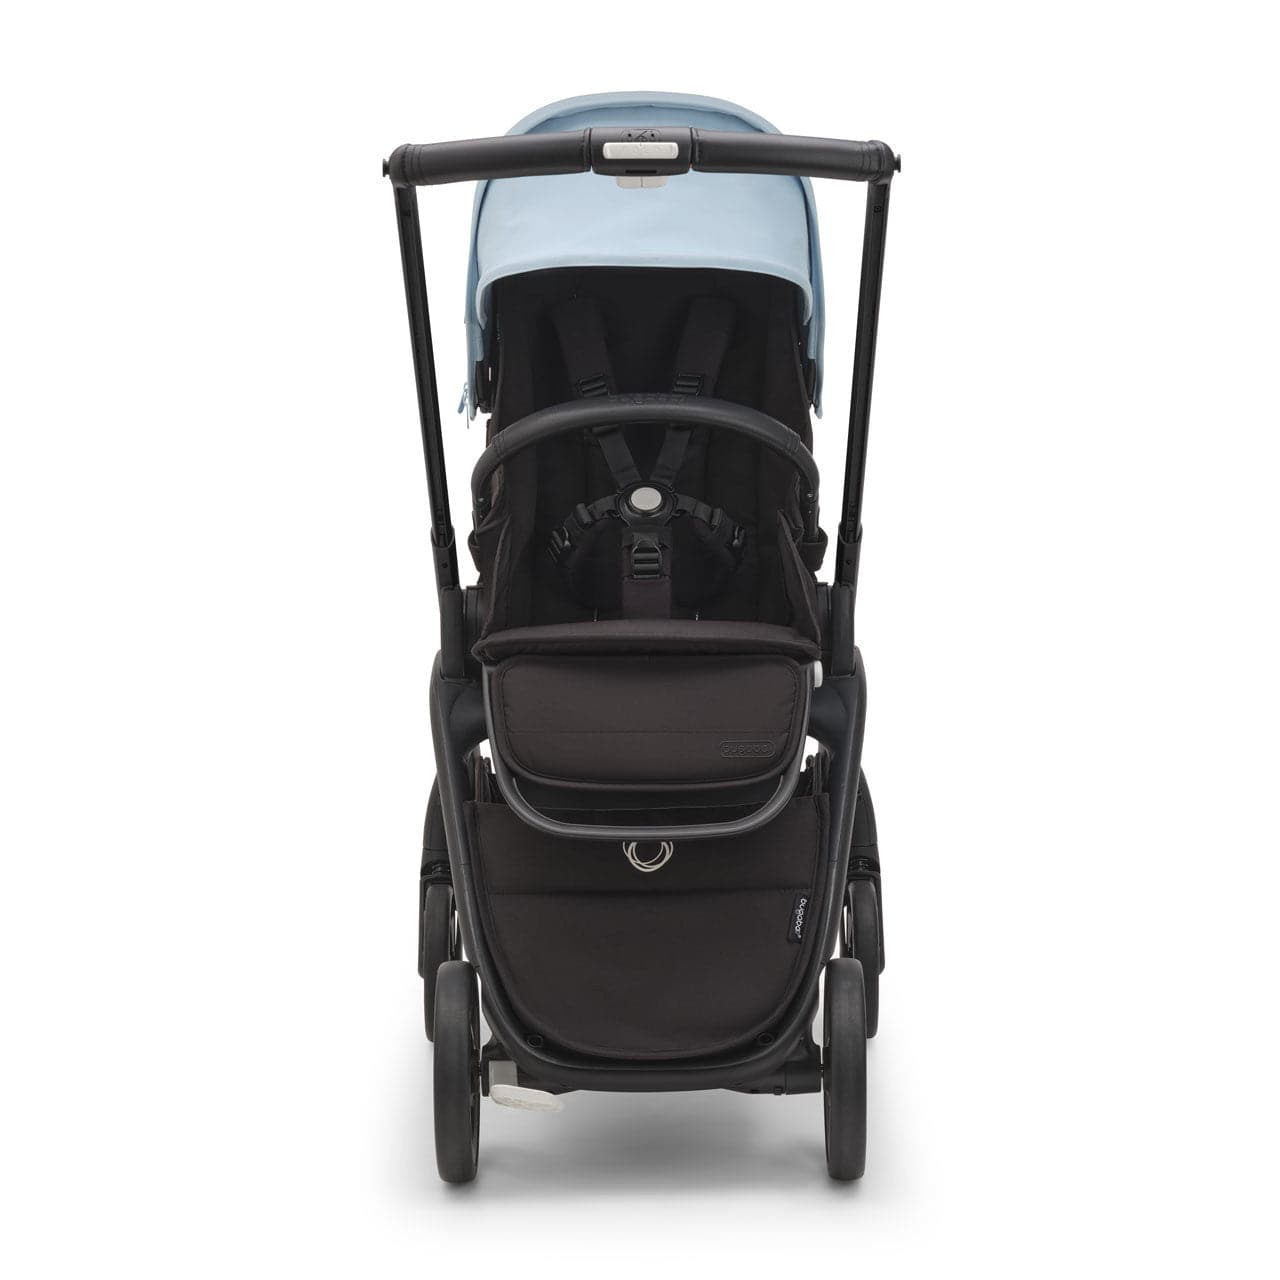 Bugaboo Dragonfly Ultimate Travel System Bundle - Skyline Blue - For Your Little One